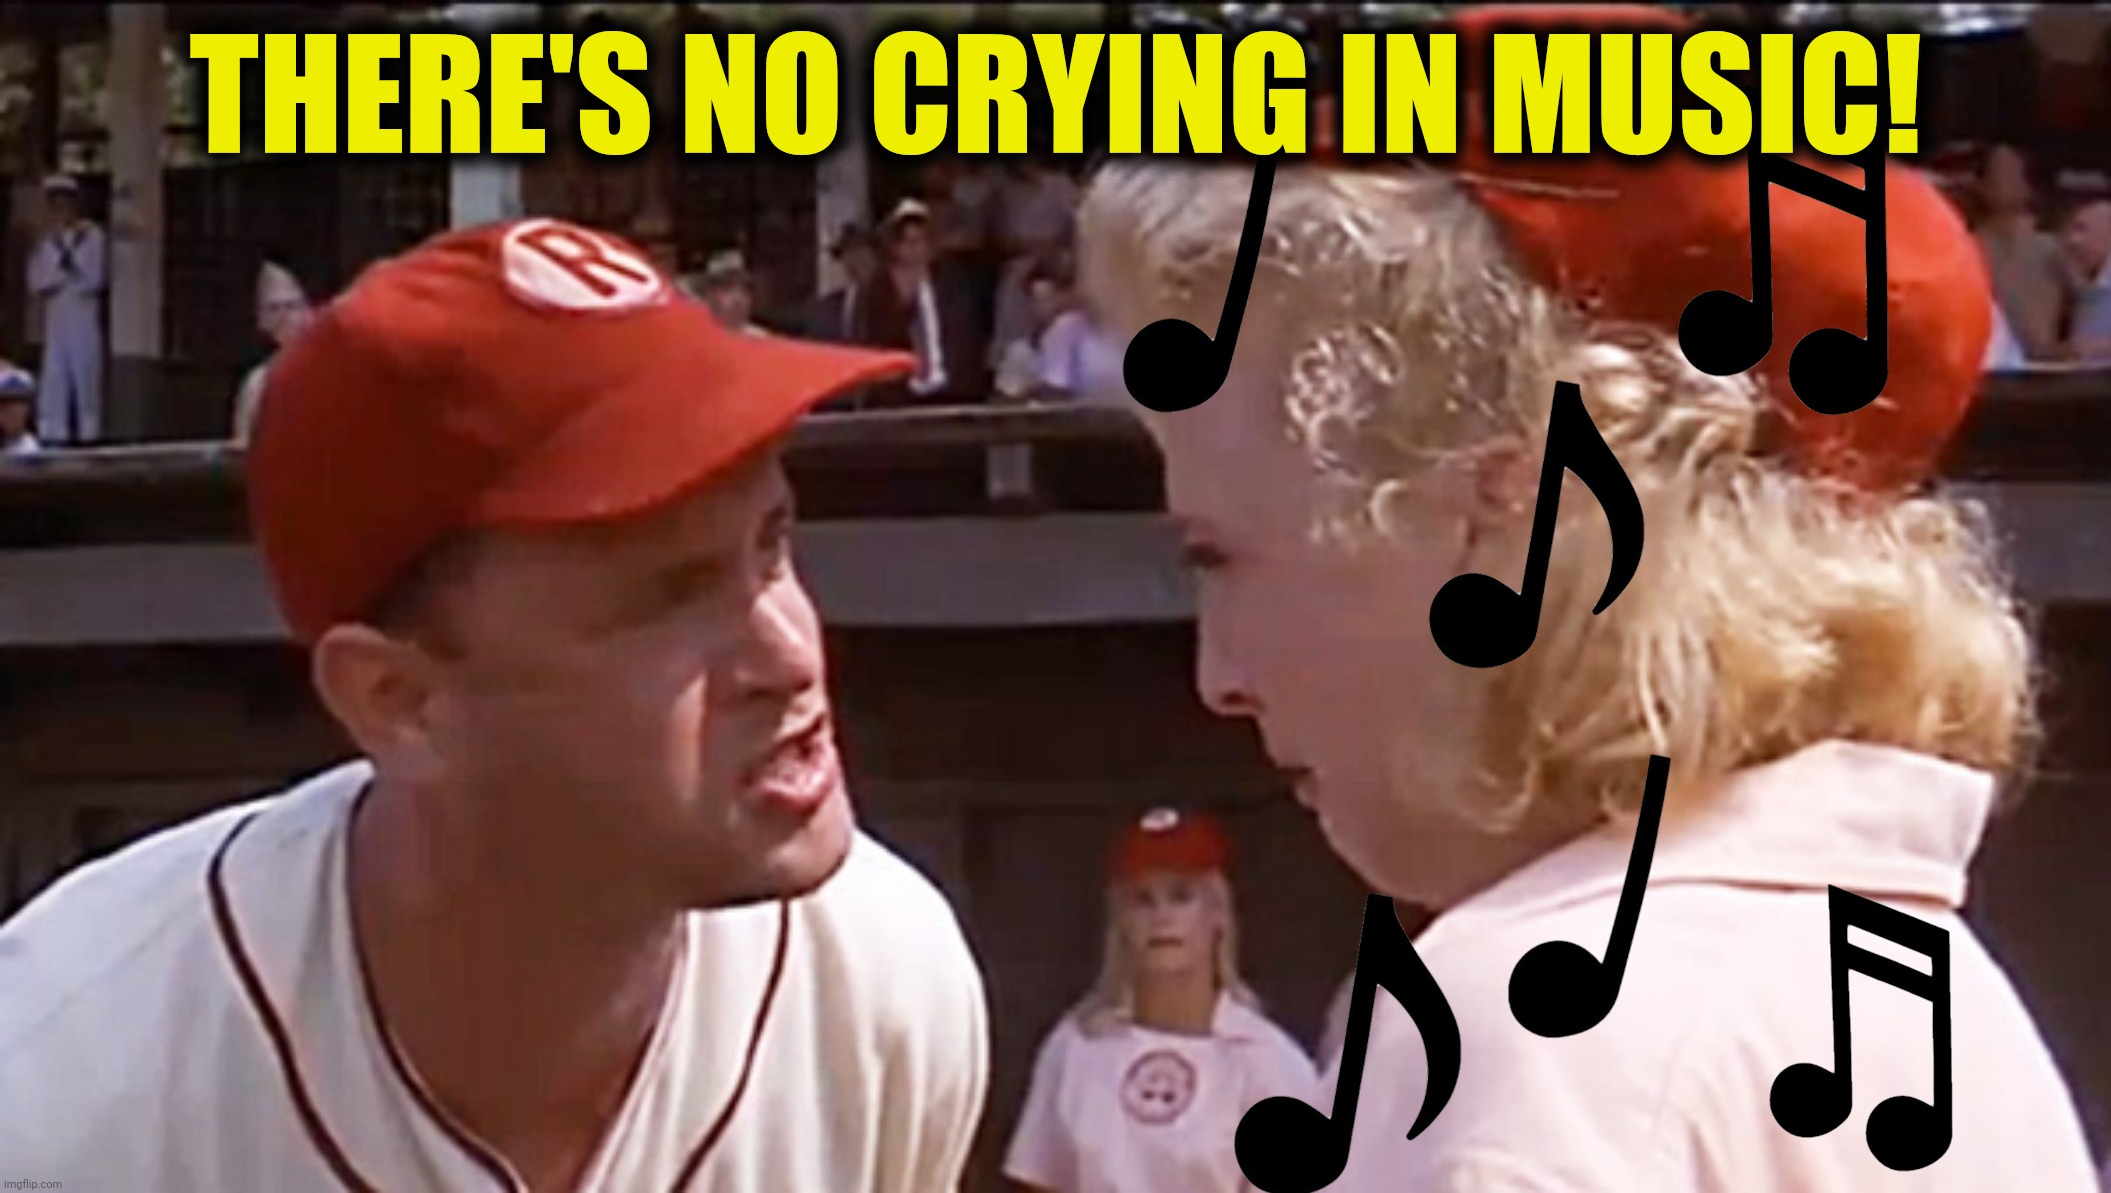 THERE'S NO CRYING IN MUSIC! | made w/ Imgflip meme maker